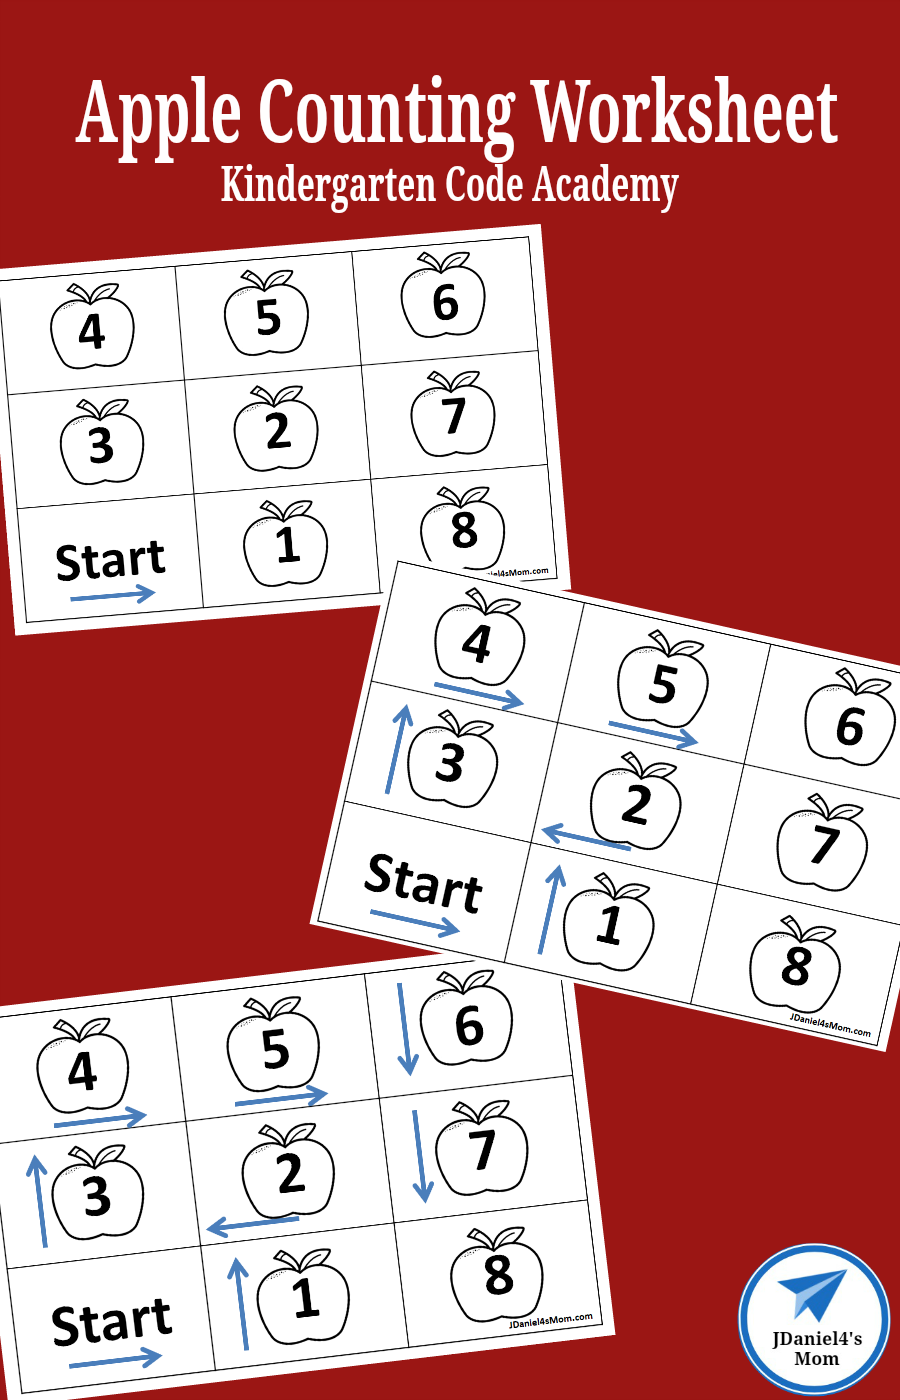 Your children will have fun learning about algorithms and they sequence tasks or events as the work on this apple counting sheet. This free printable is a part of my kindergarten code academy. #apple #coding #algorithm #freebie #kindergarten #jdaniel4smom